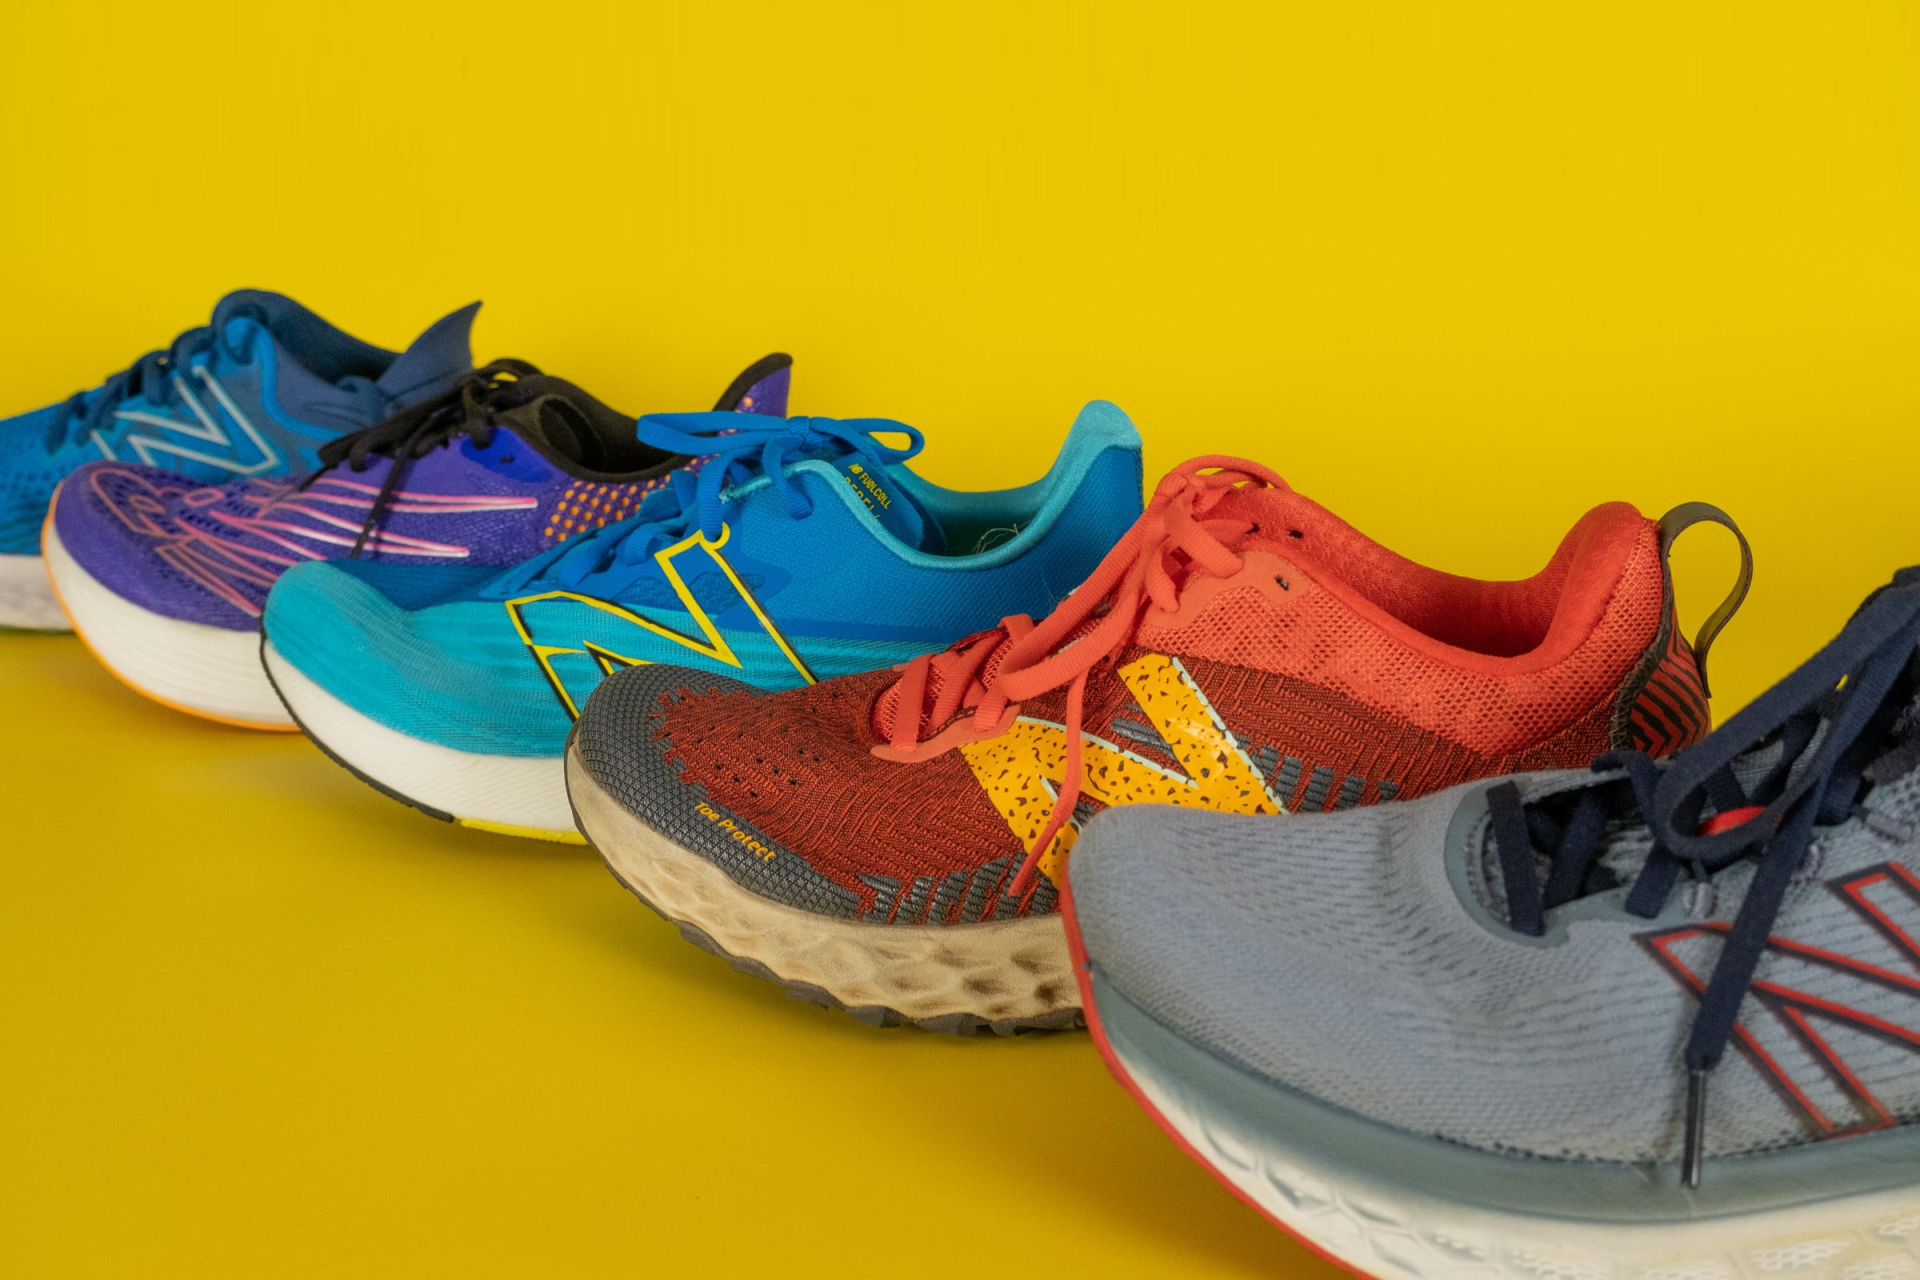 Teachers get a 15% discount on New Balance footwear and apparel.